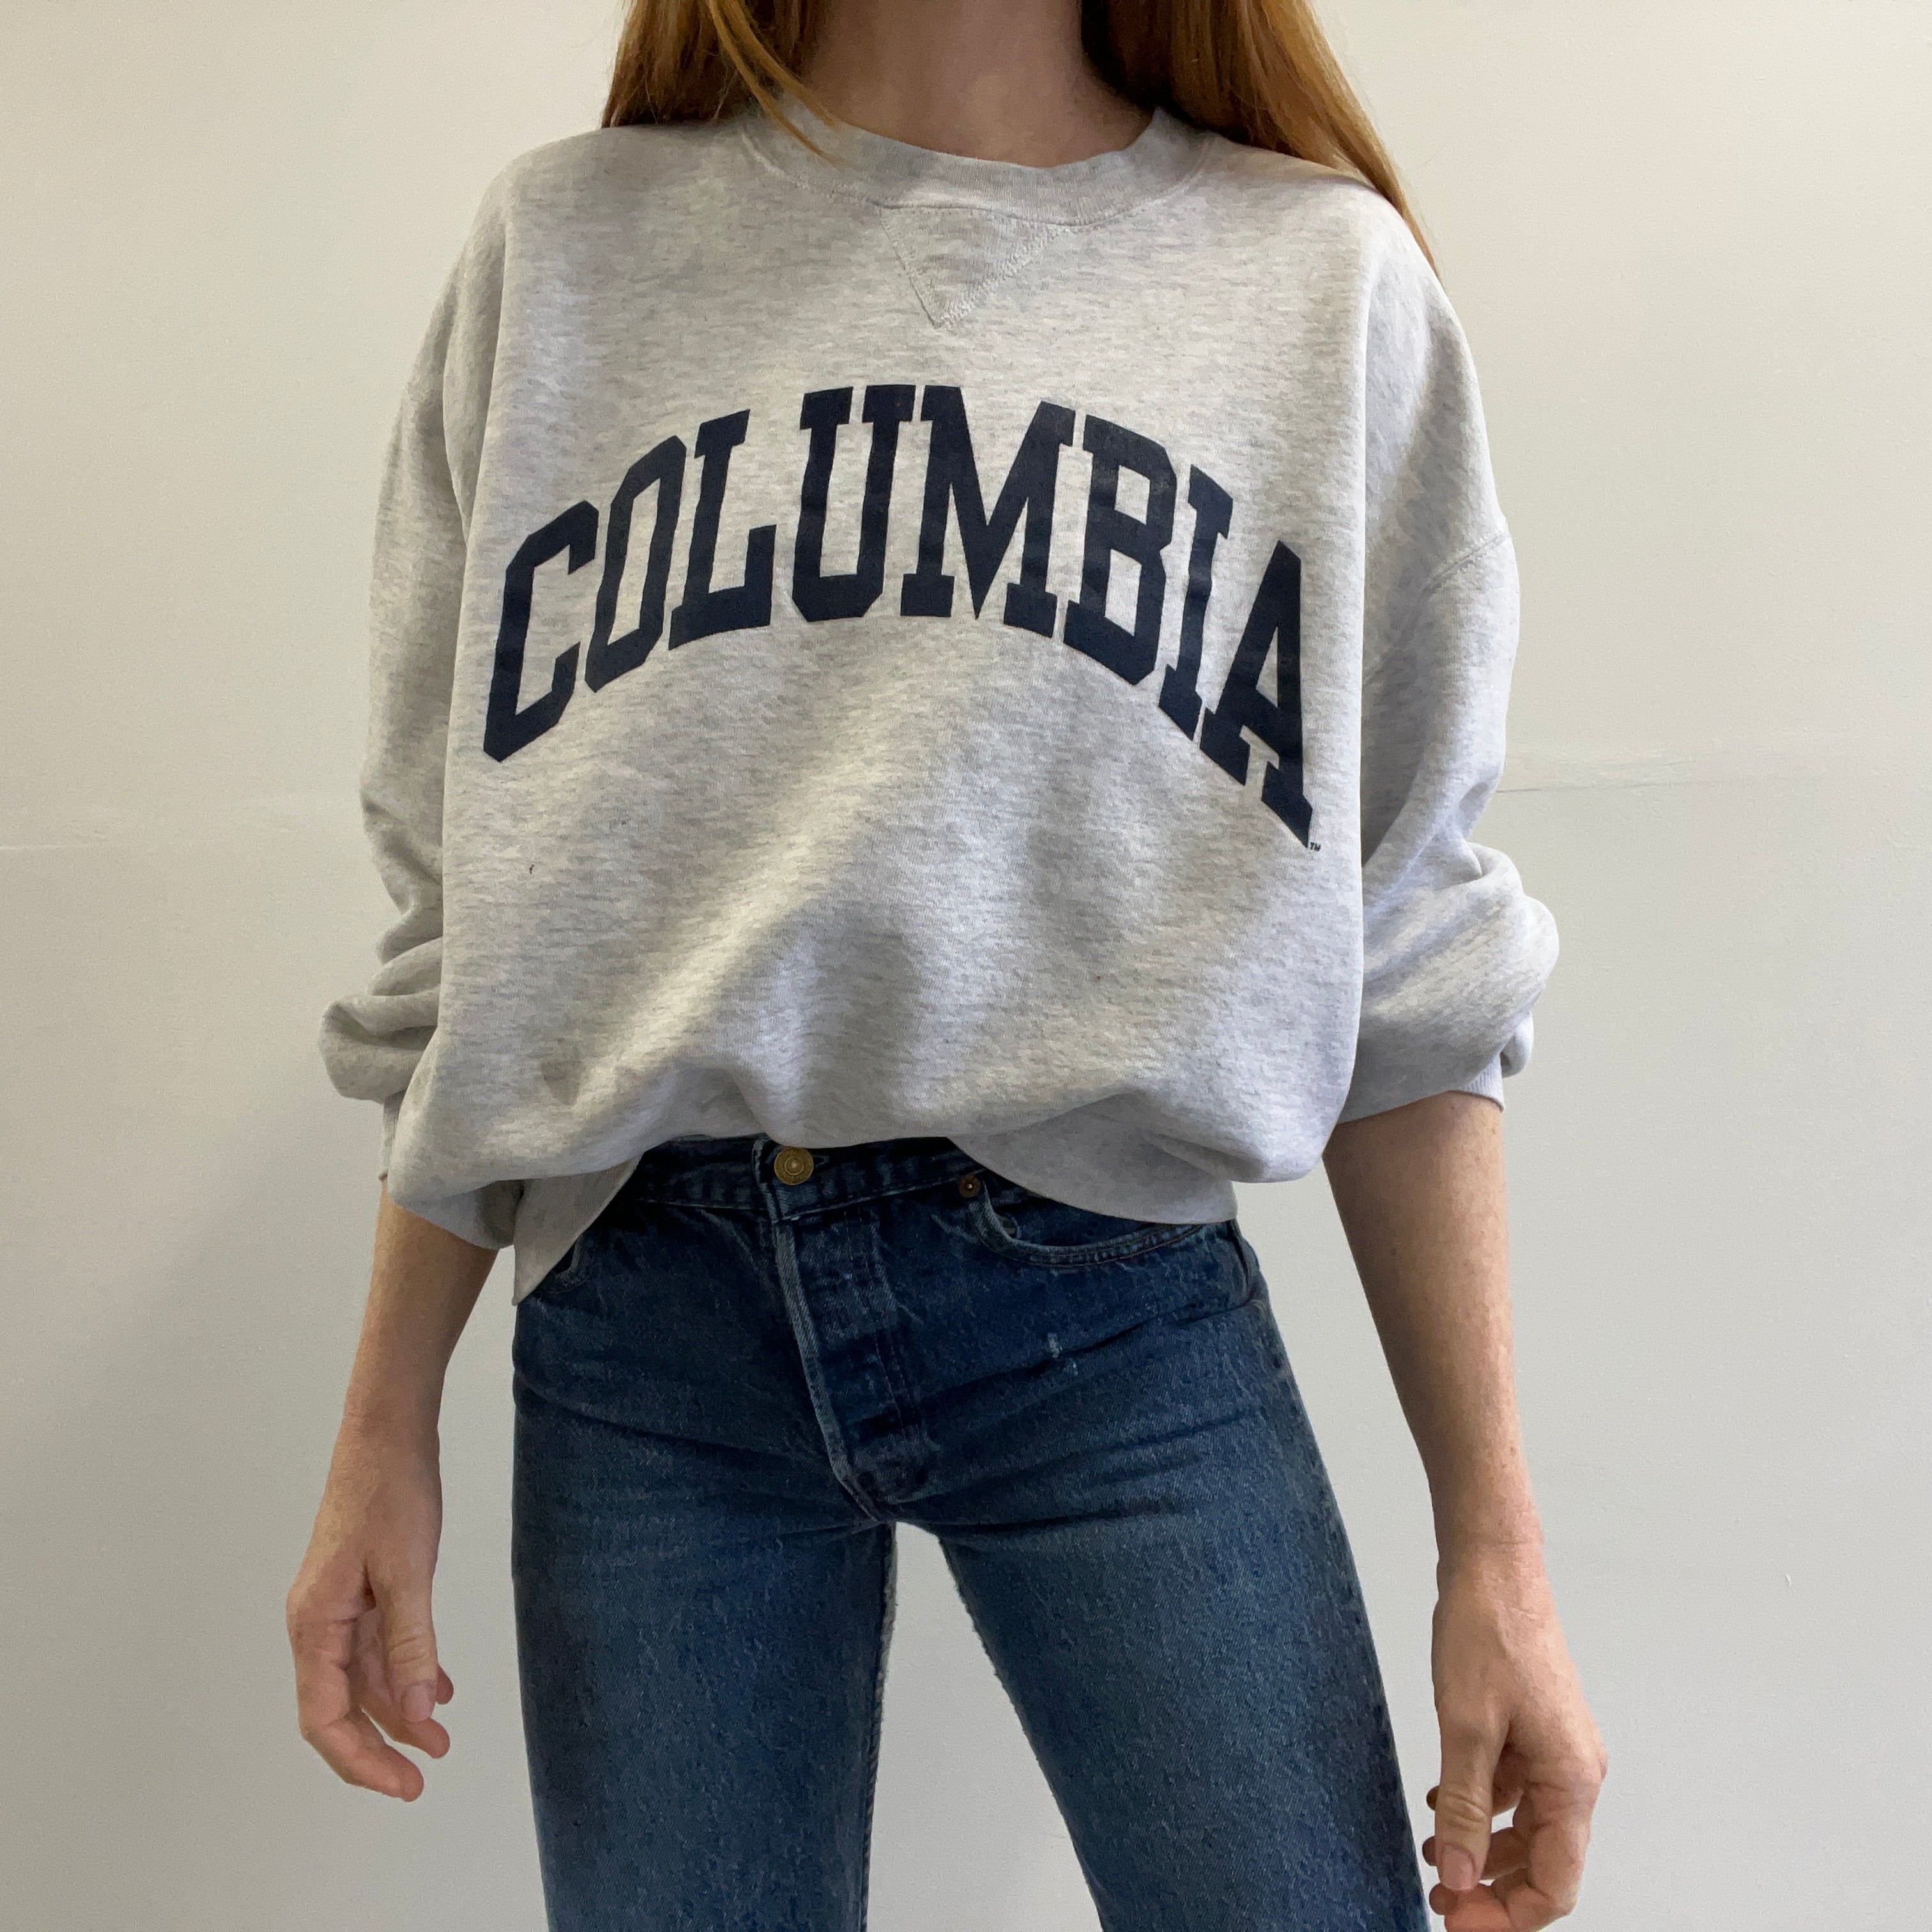 1980s Columbia Paint Stained Sweatshirt by Russell!